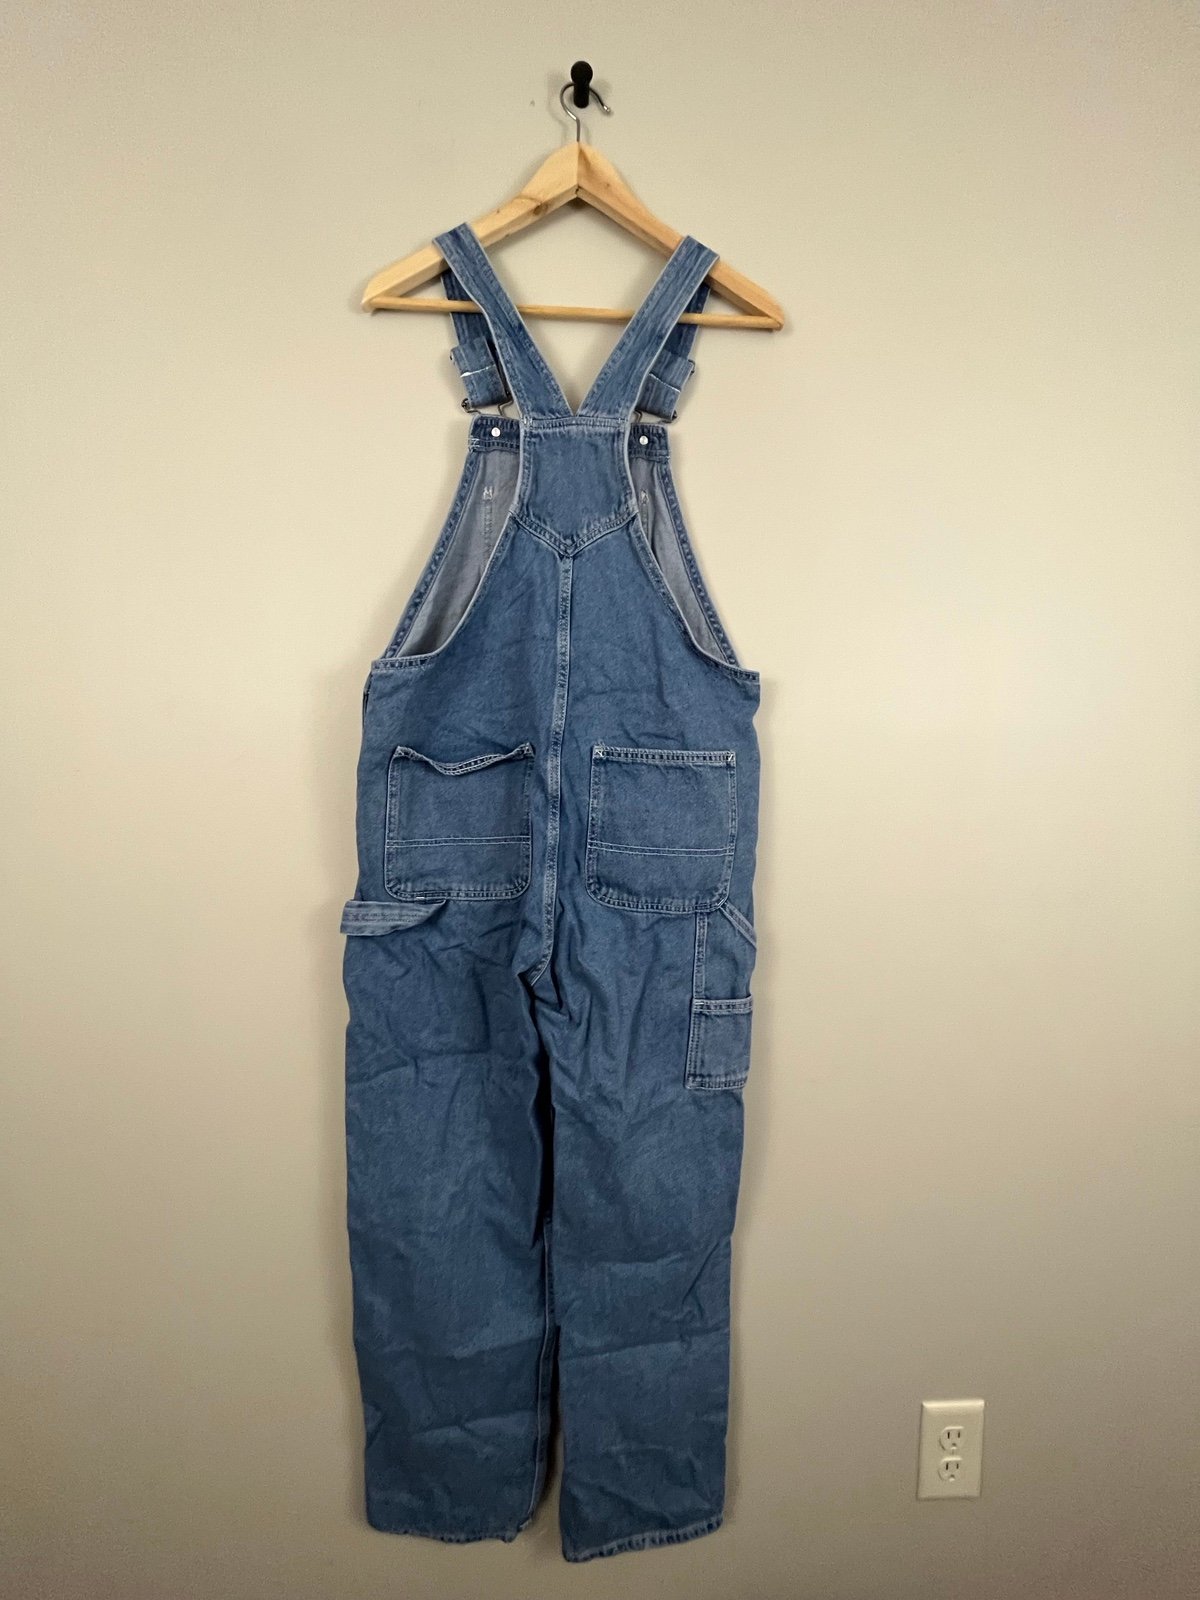 Factory Direct  Vans Groundwork Denim Overall Stone Wash Womens Size Small Brand New pHjN1U9FF Novel 